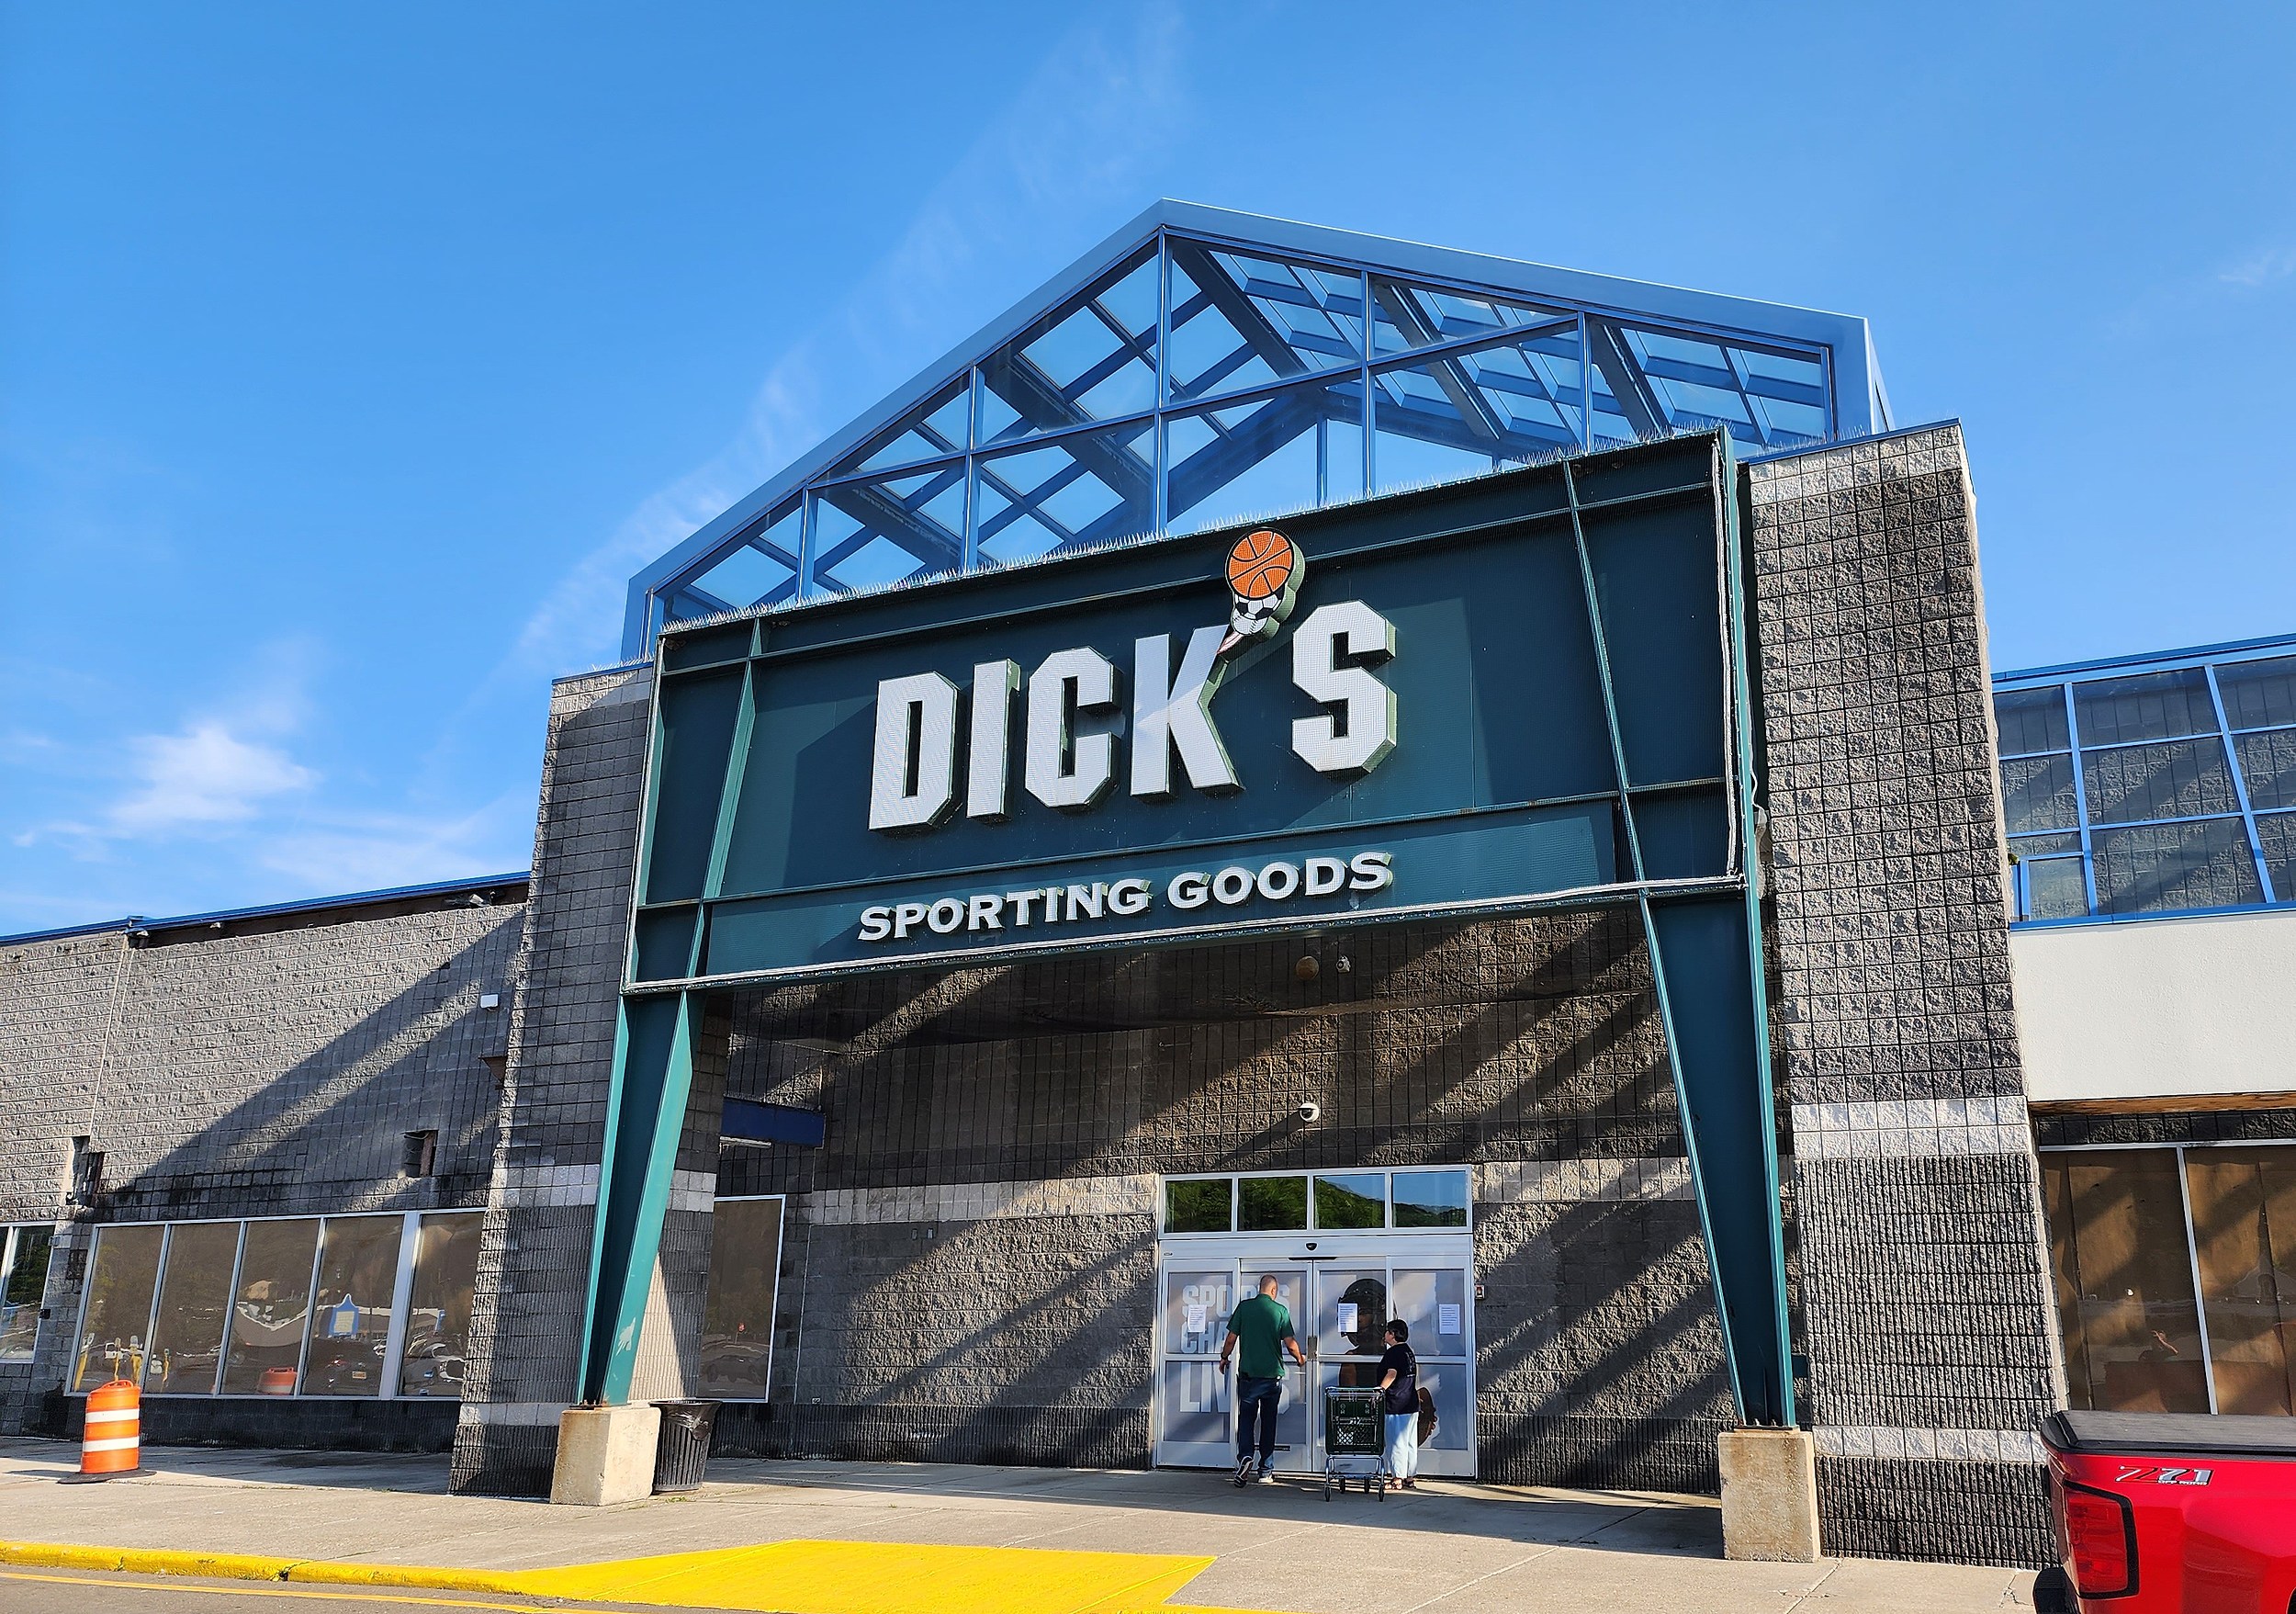 Dick's Sporting Goods looks to open in February, hire 65 